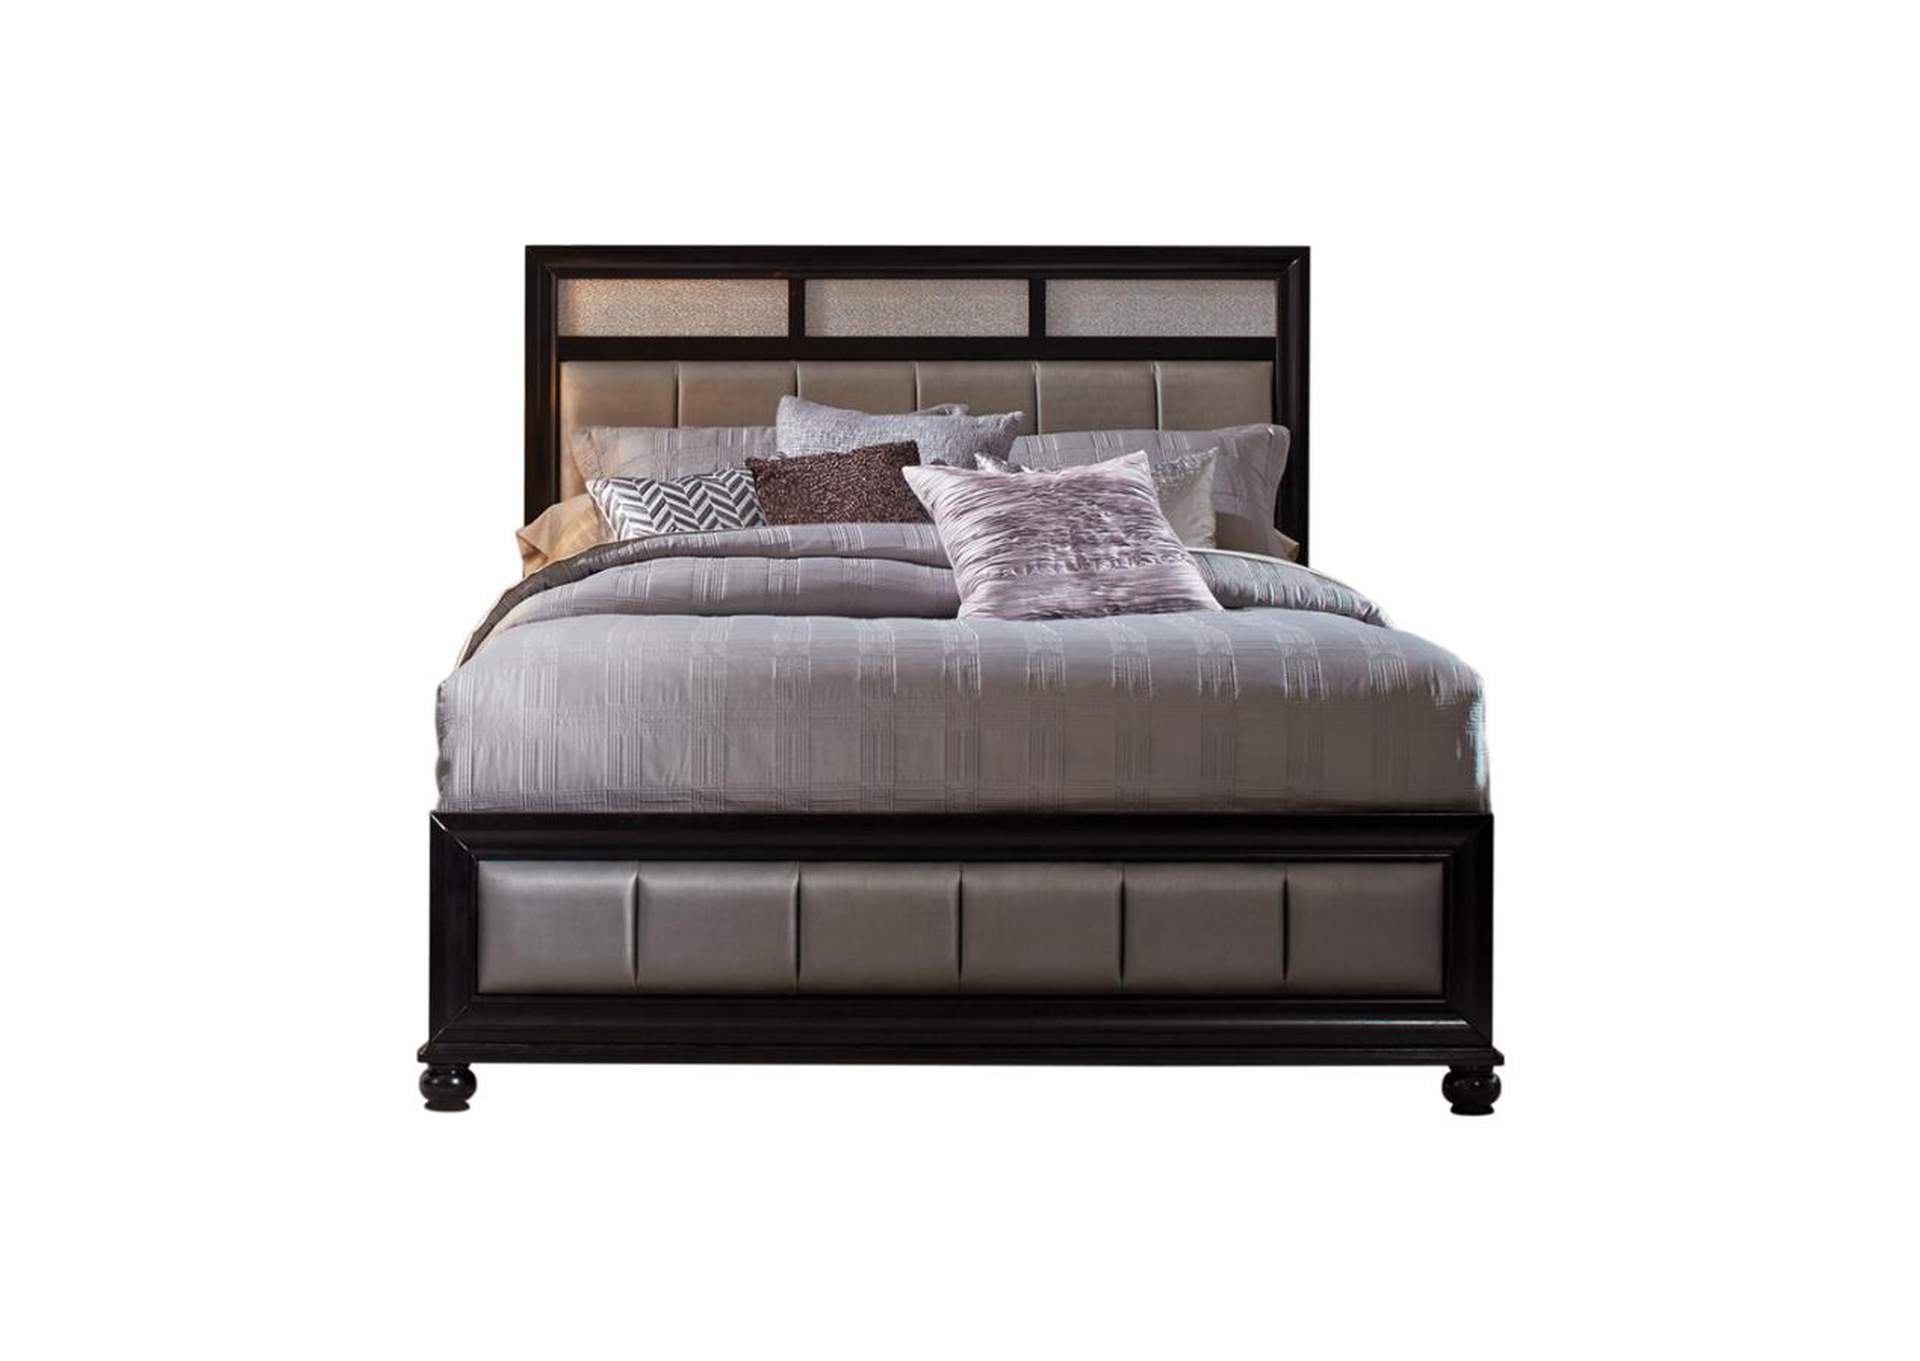 Barzini Queen Upholstered Bed Black and Grey,Coaster Furniture